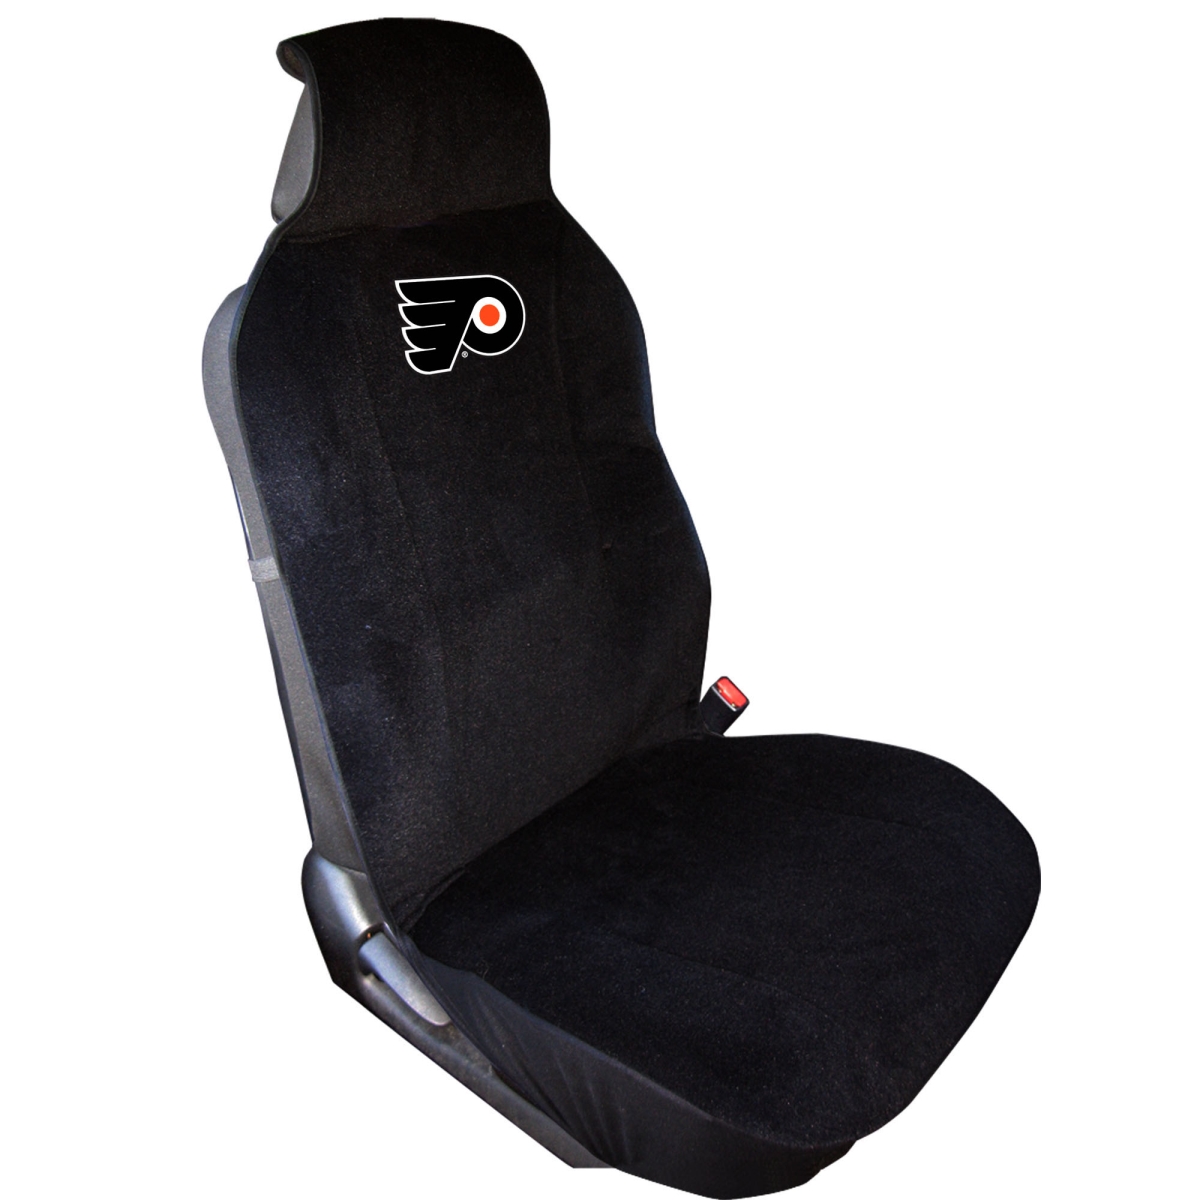 Picture of Fremont Die 023245868051 NHL Philadelphia Flyers Seat Cover